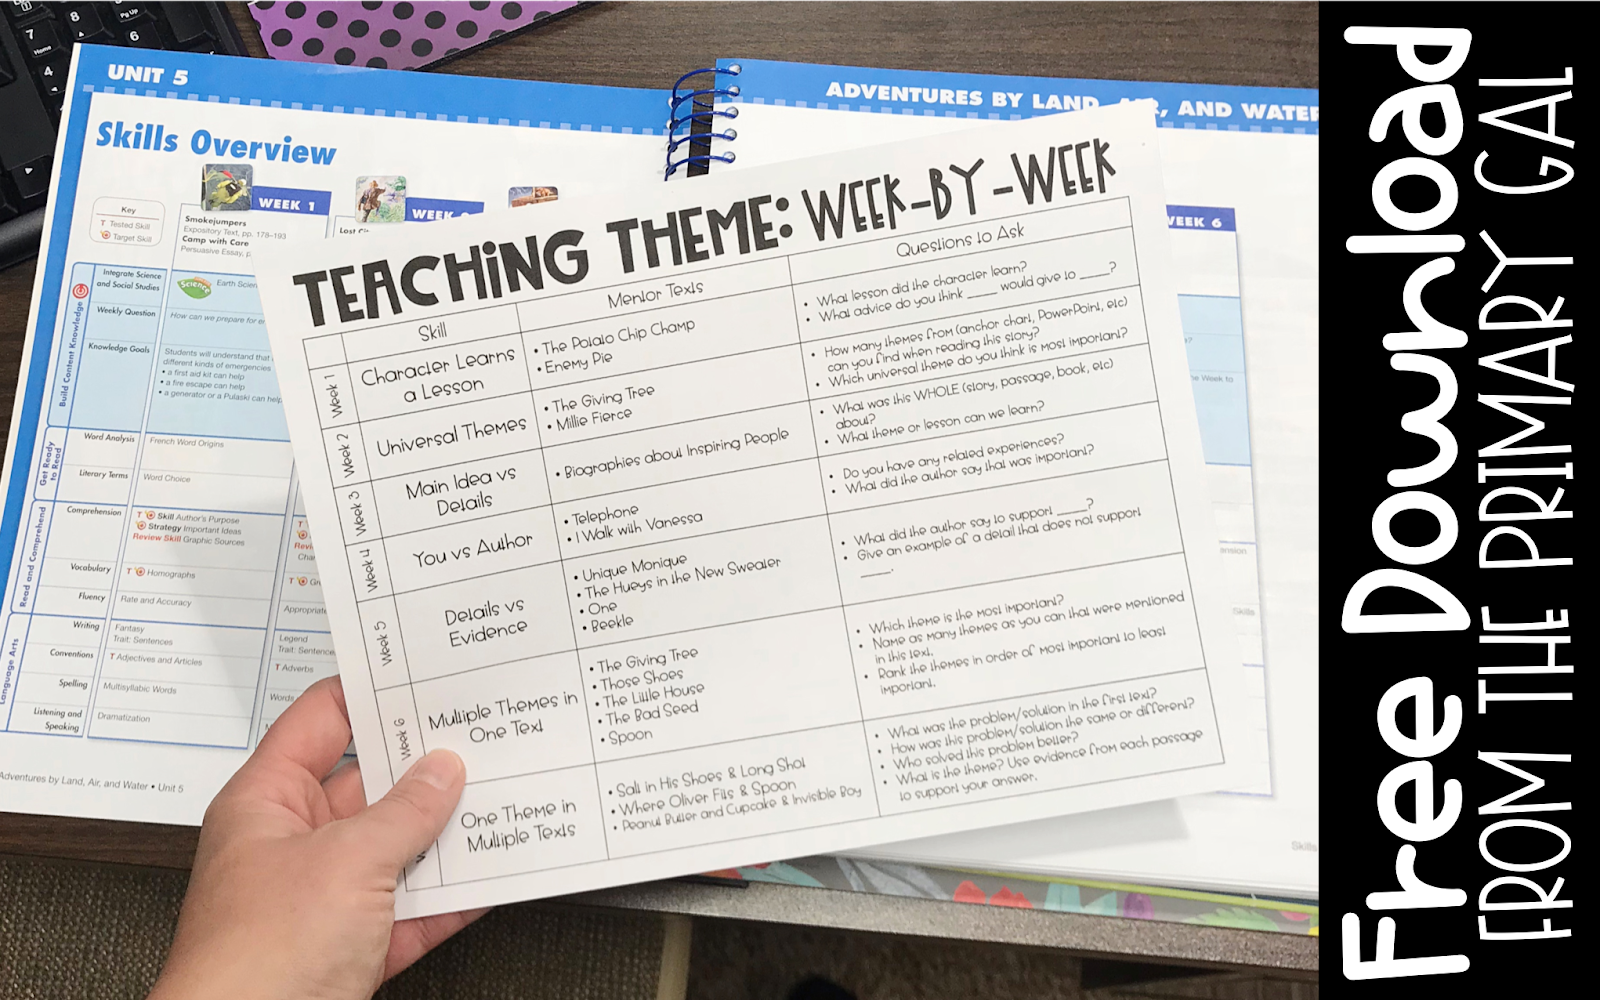 Click here for your FREE Teaching Theme: Week-By-Week download